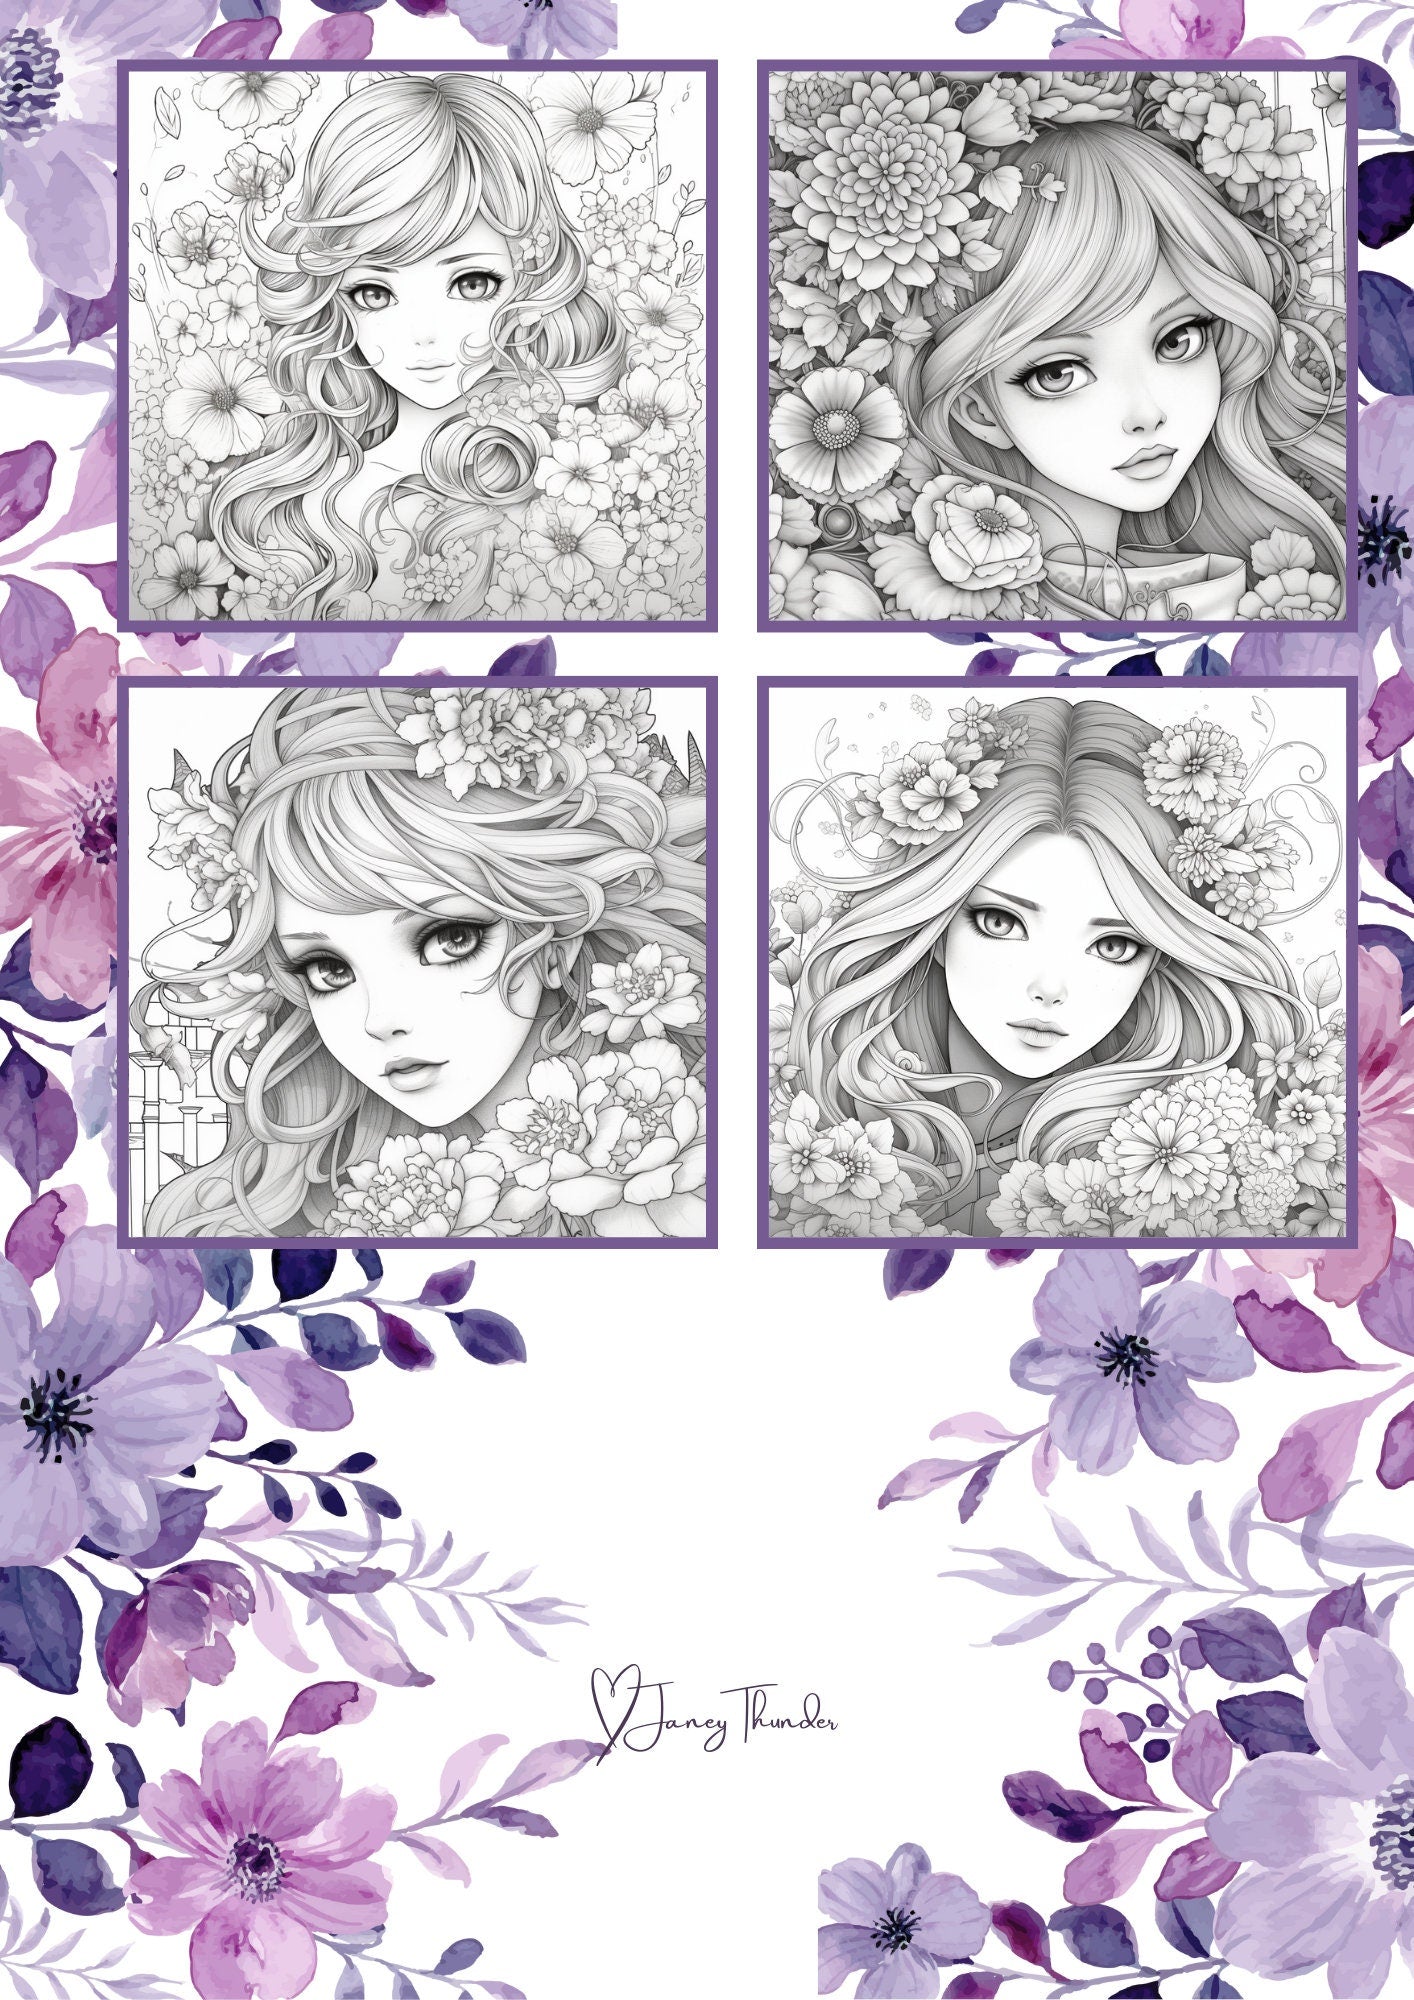 Anime Girls & Flowers Coloring Book - Intricate Blossom Designs and Uplifting Quotes for Relaxation